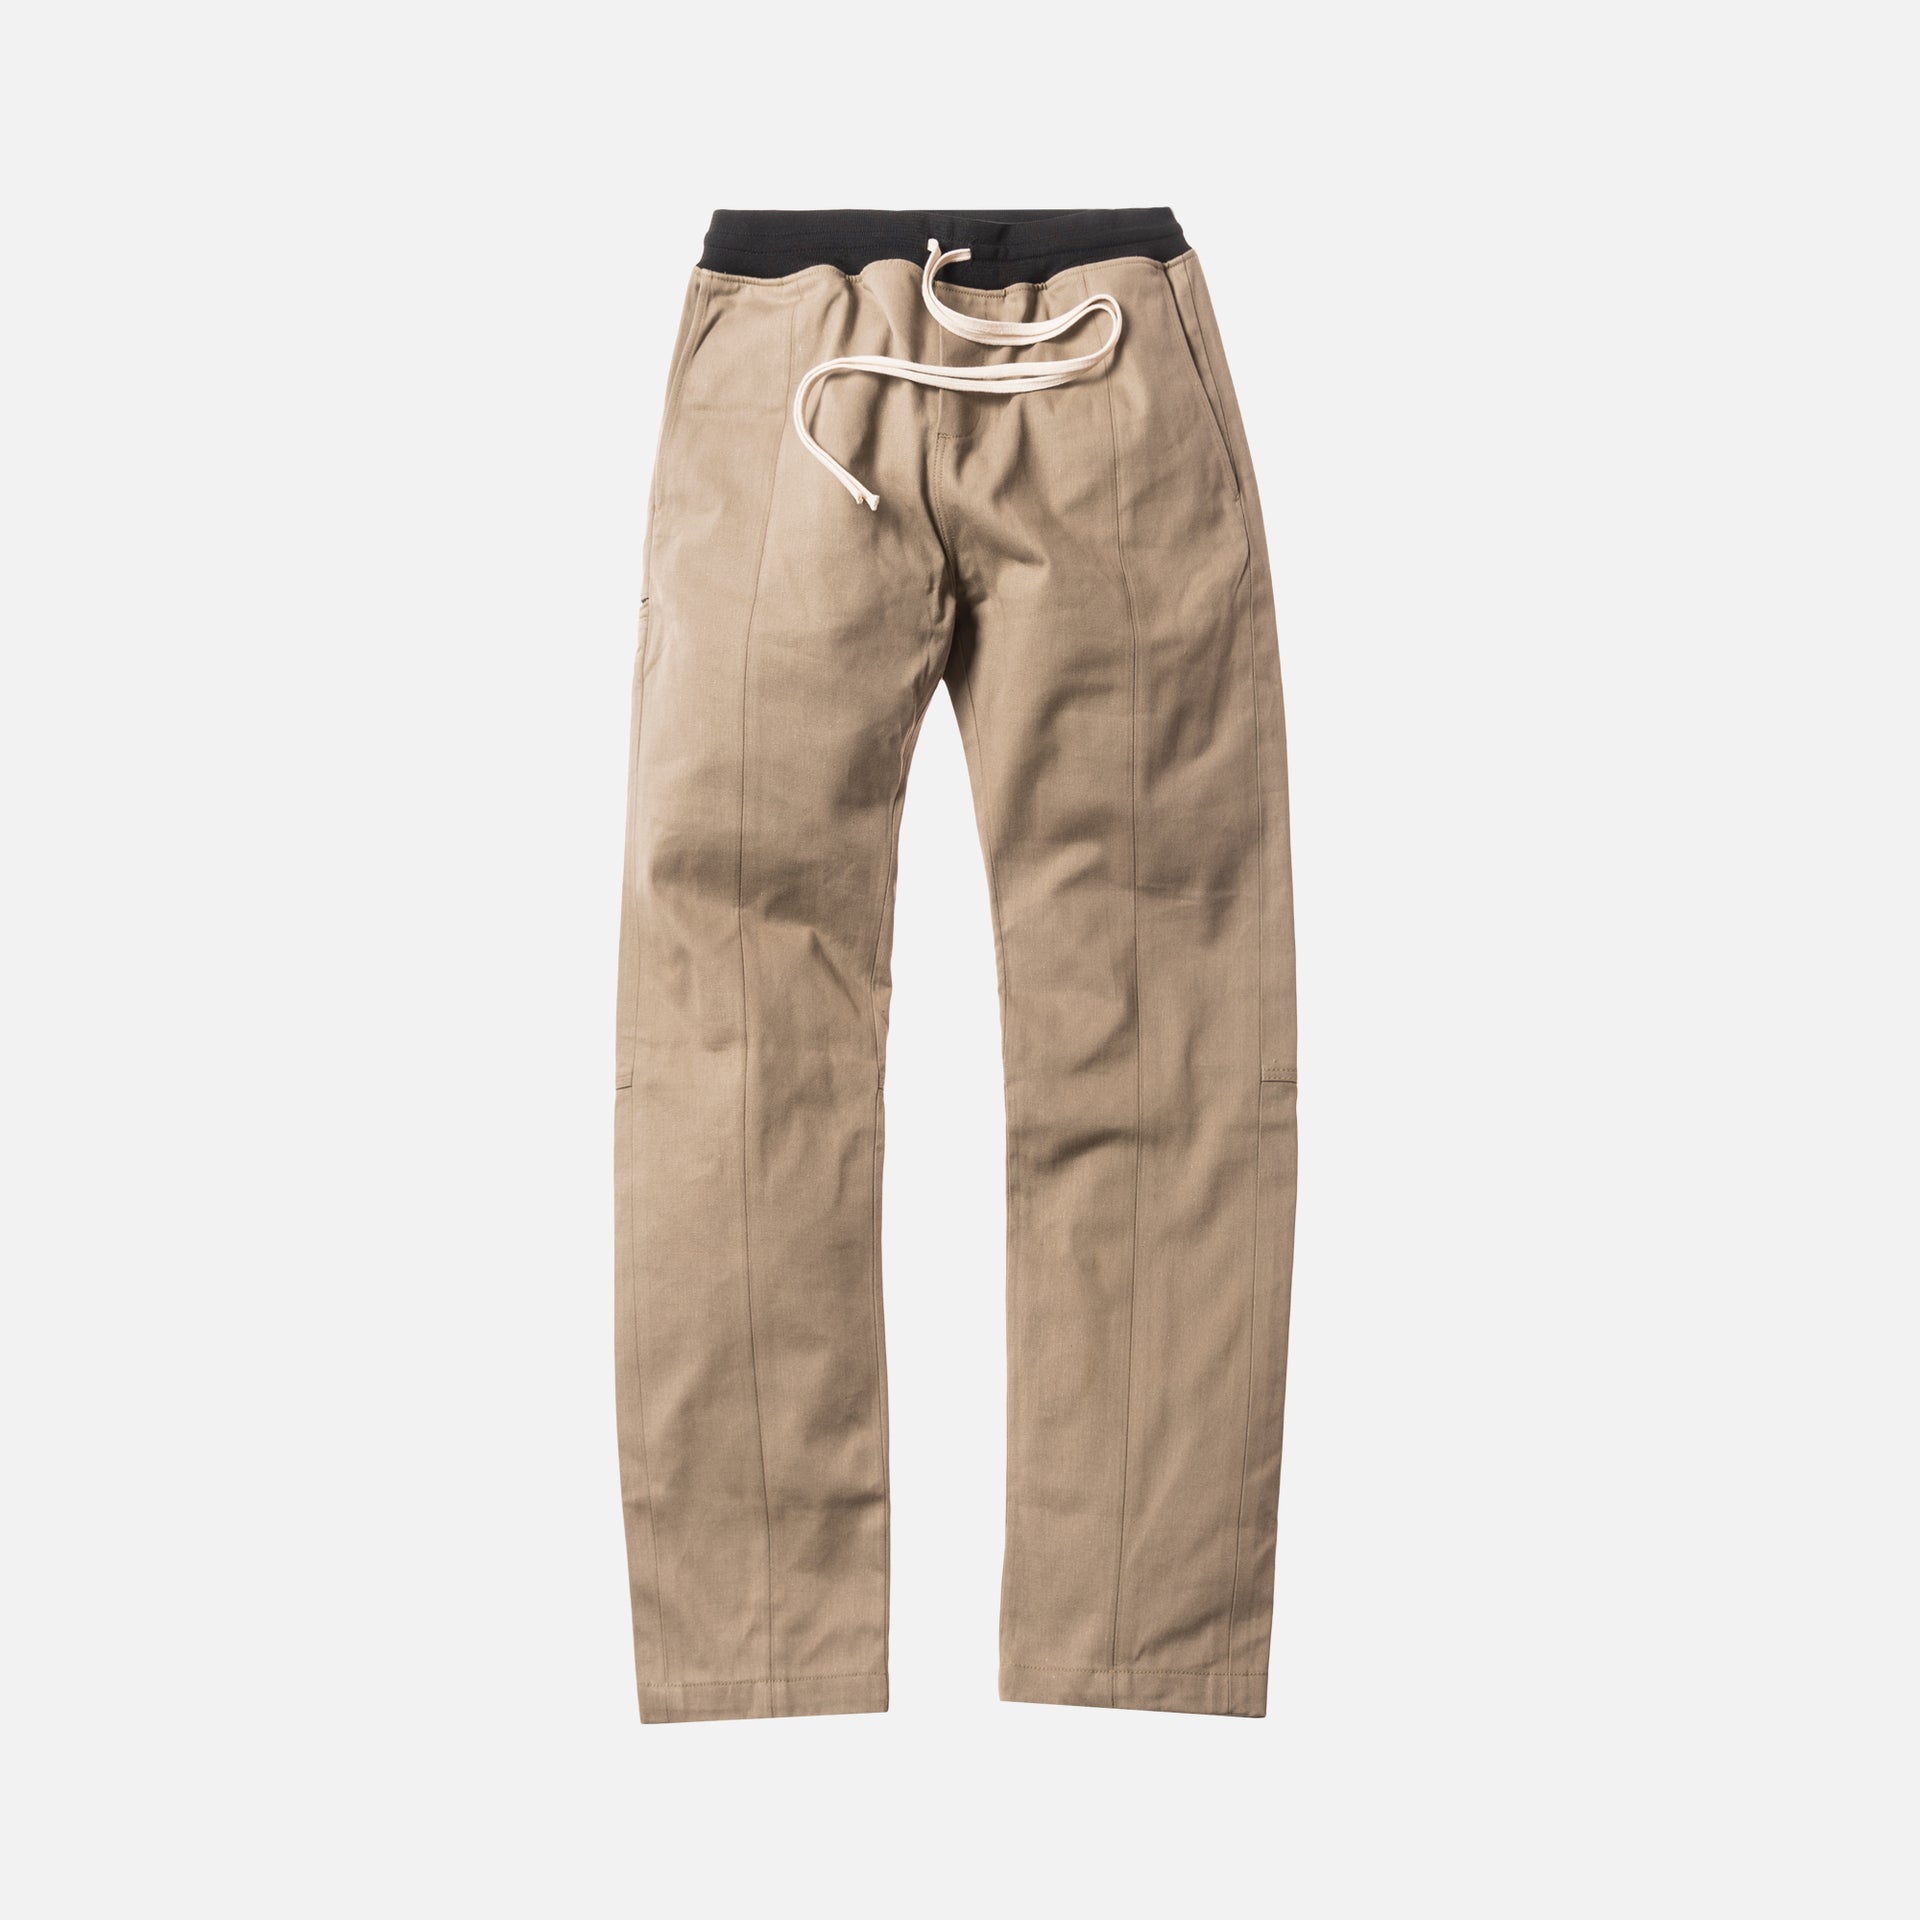 Fear of God 5th Collection Selvedge Chino Baggy Trouser - Khaki